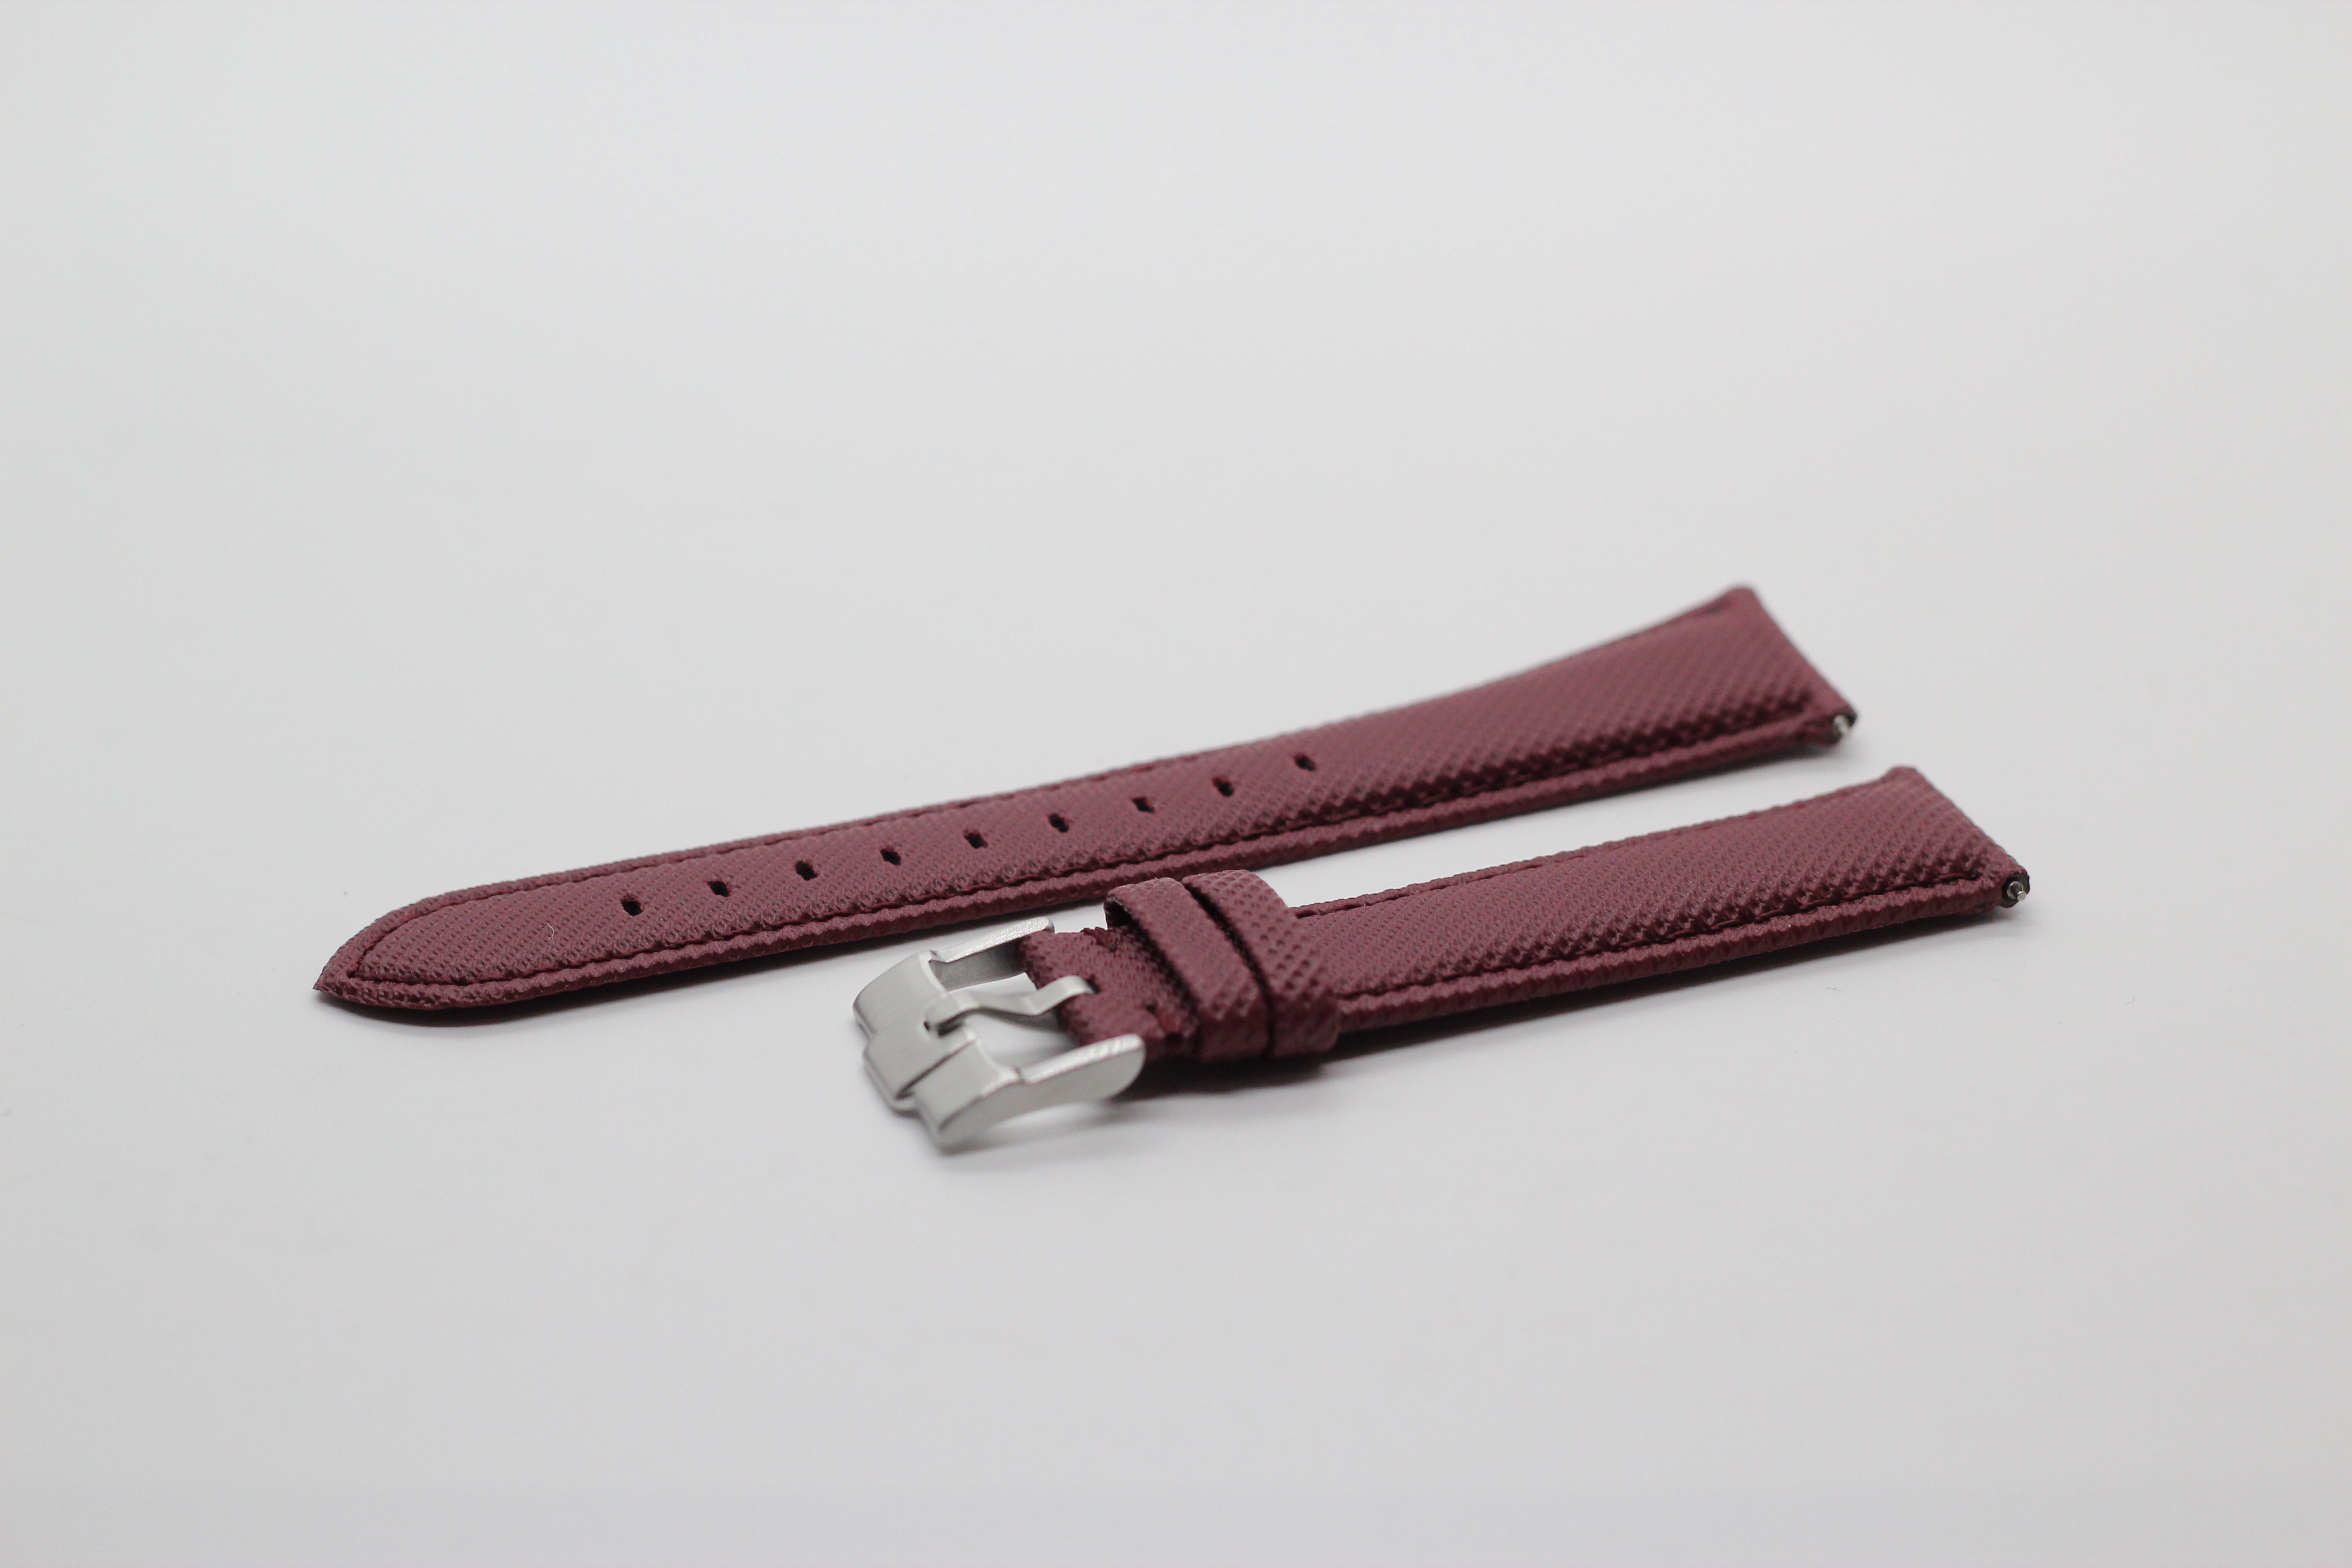 [Quick Release] Sailcloth - Burgundy Red - Strapify